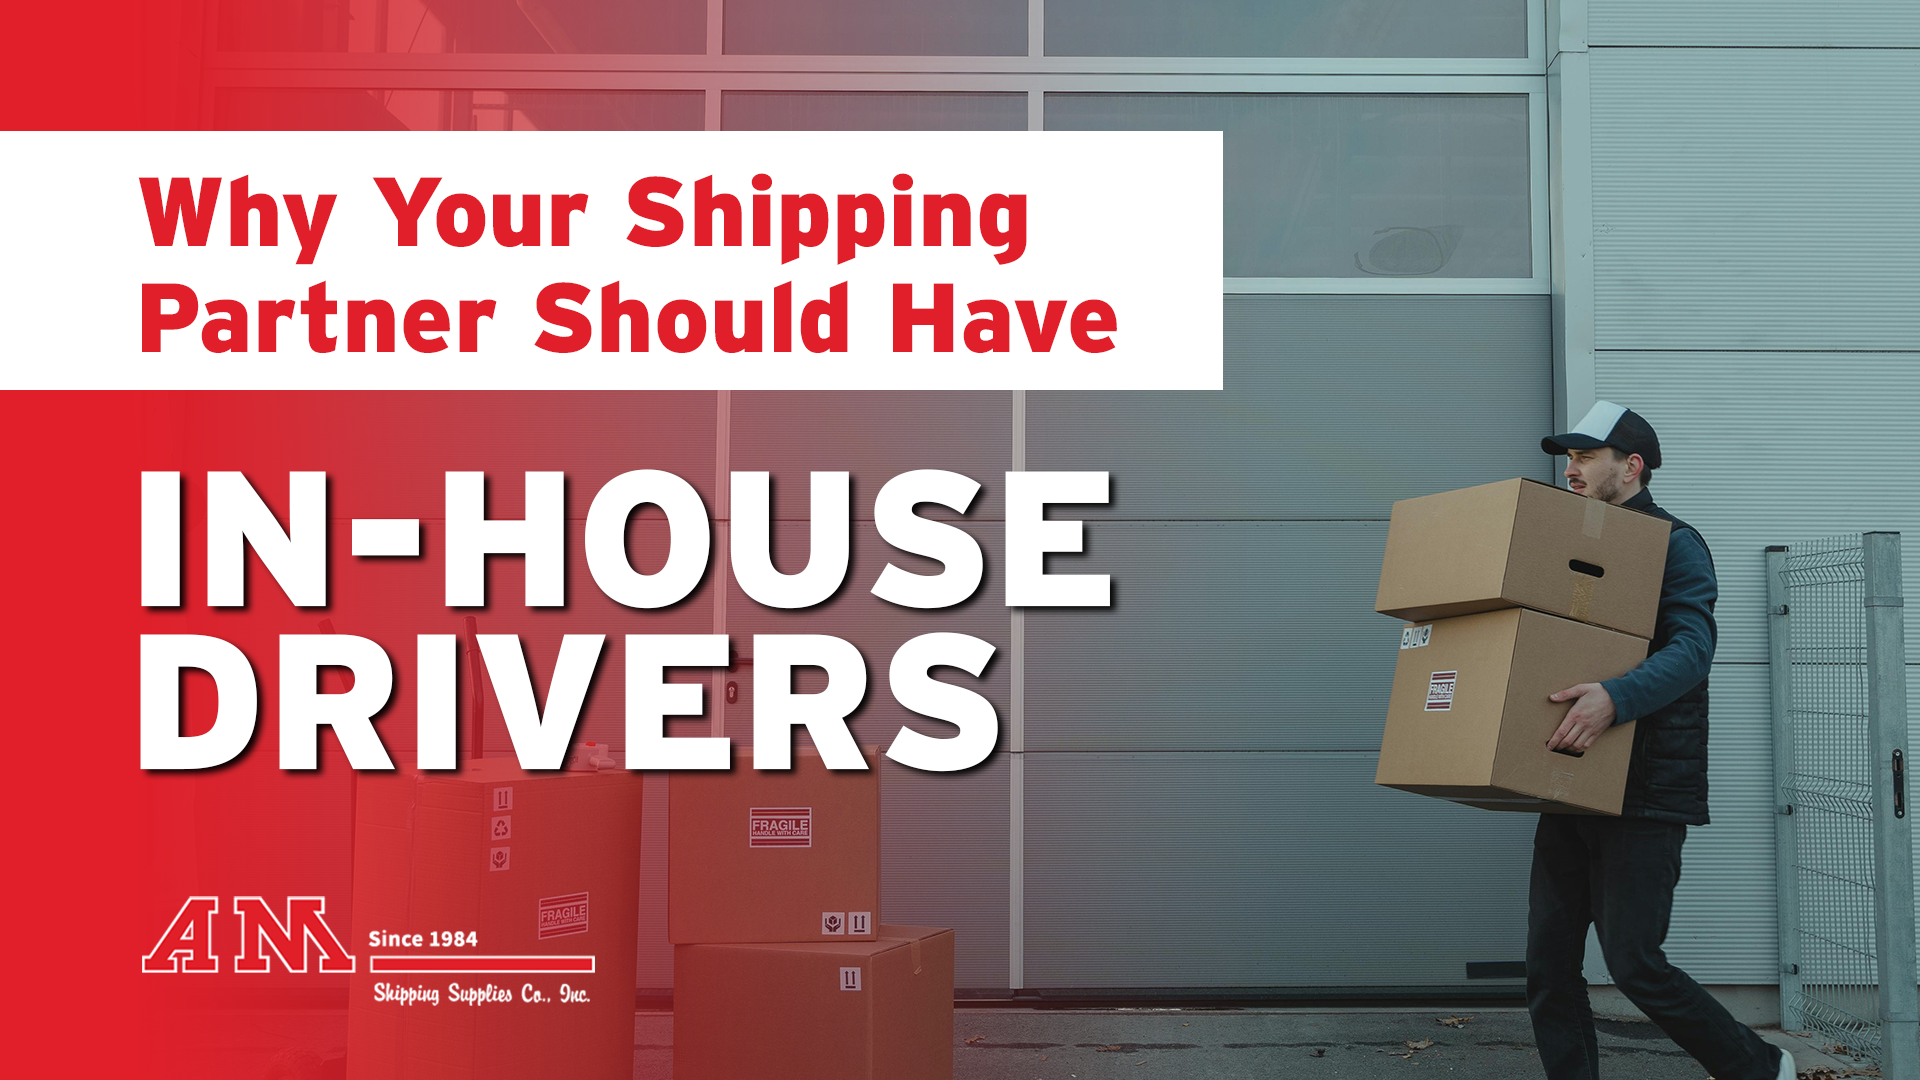 Why Your Shipping Partner Should Have In-House Drivers